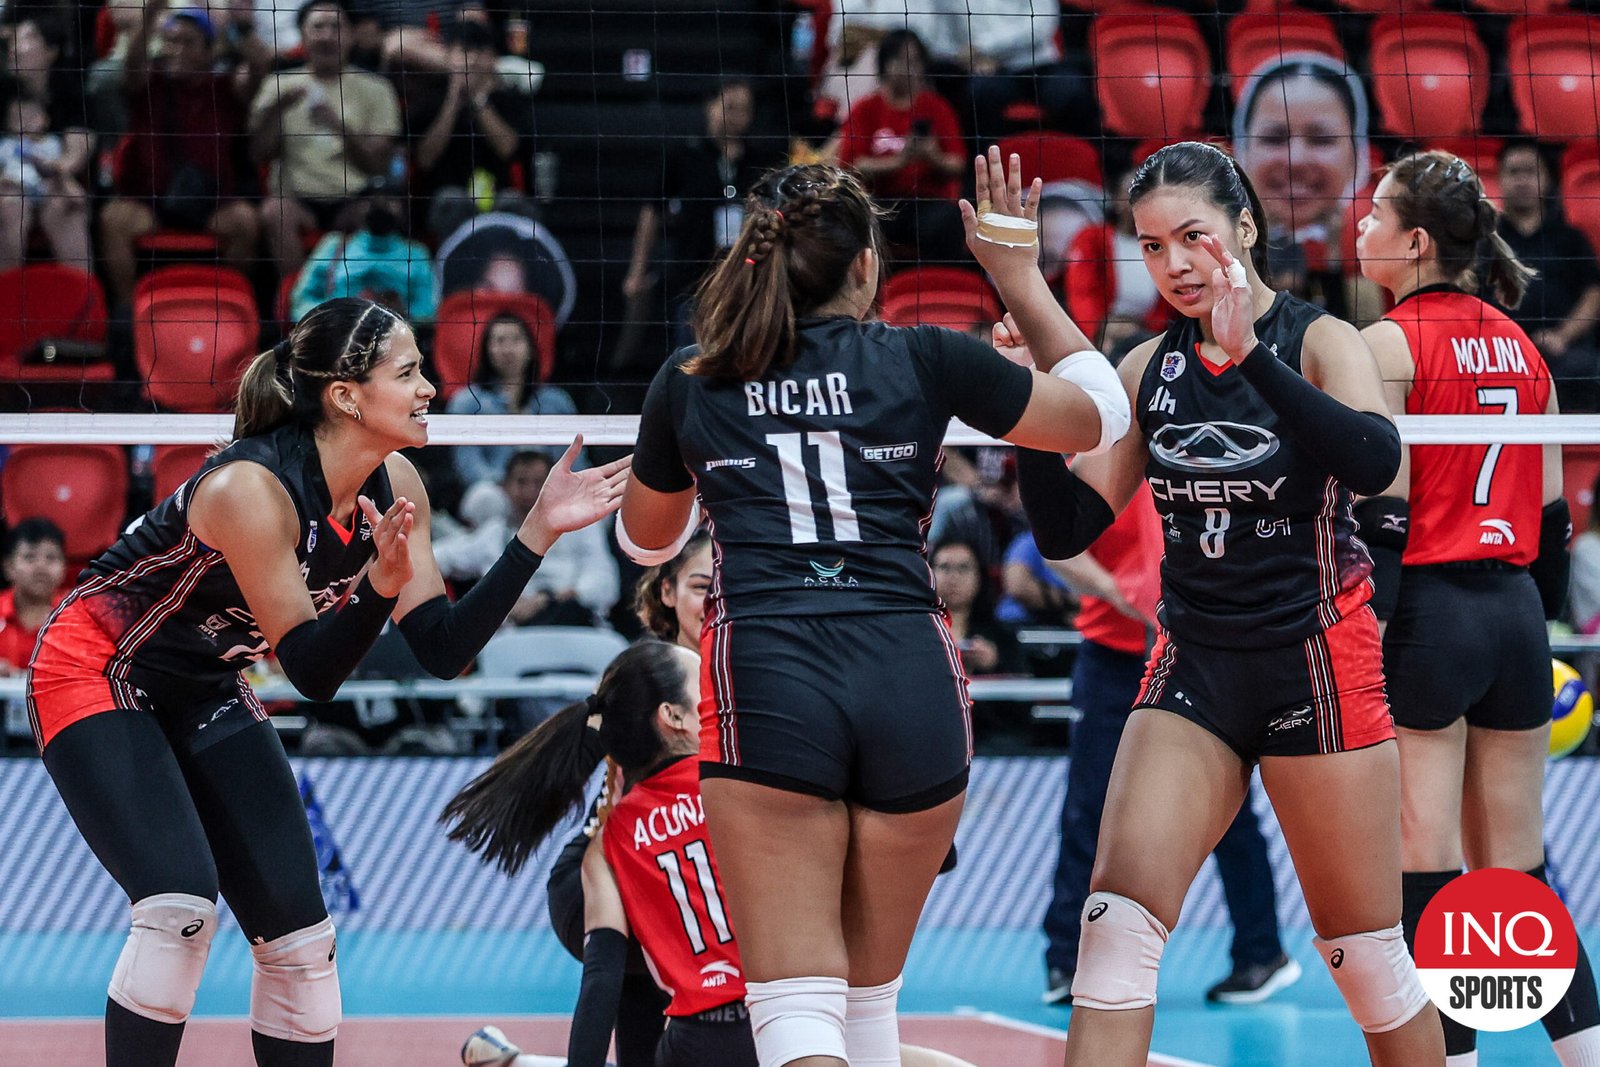 PVL: Laure sisters pace Chery Tiggo in crucial win over Cignal